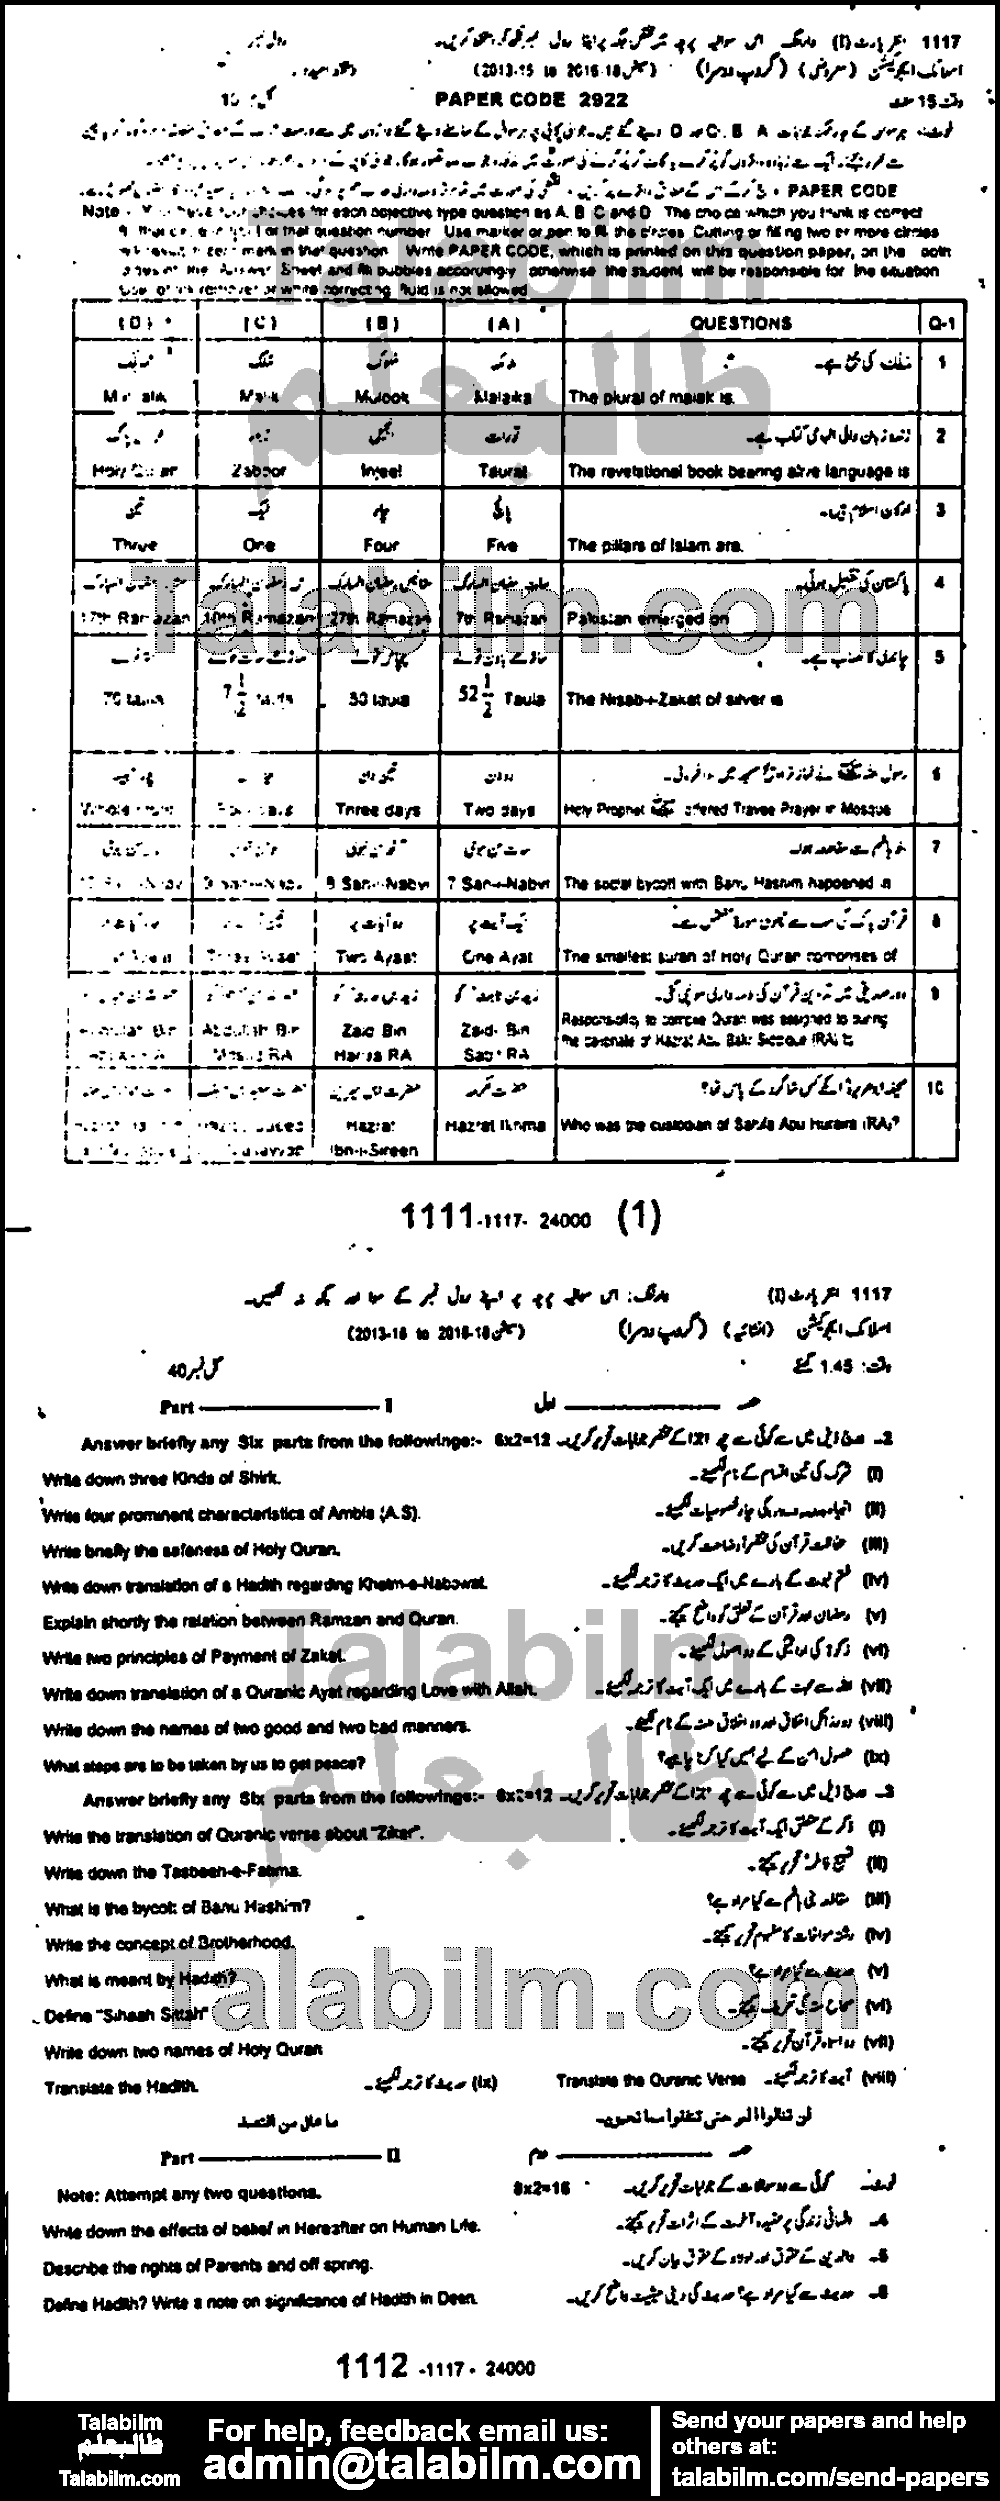 Islamiat Compulsory 0 past paper for Group-II 2017